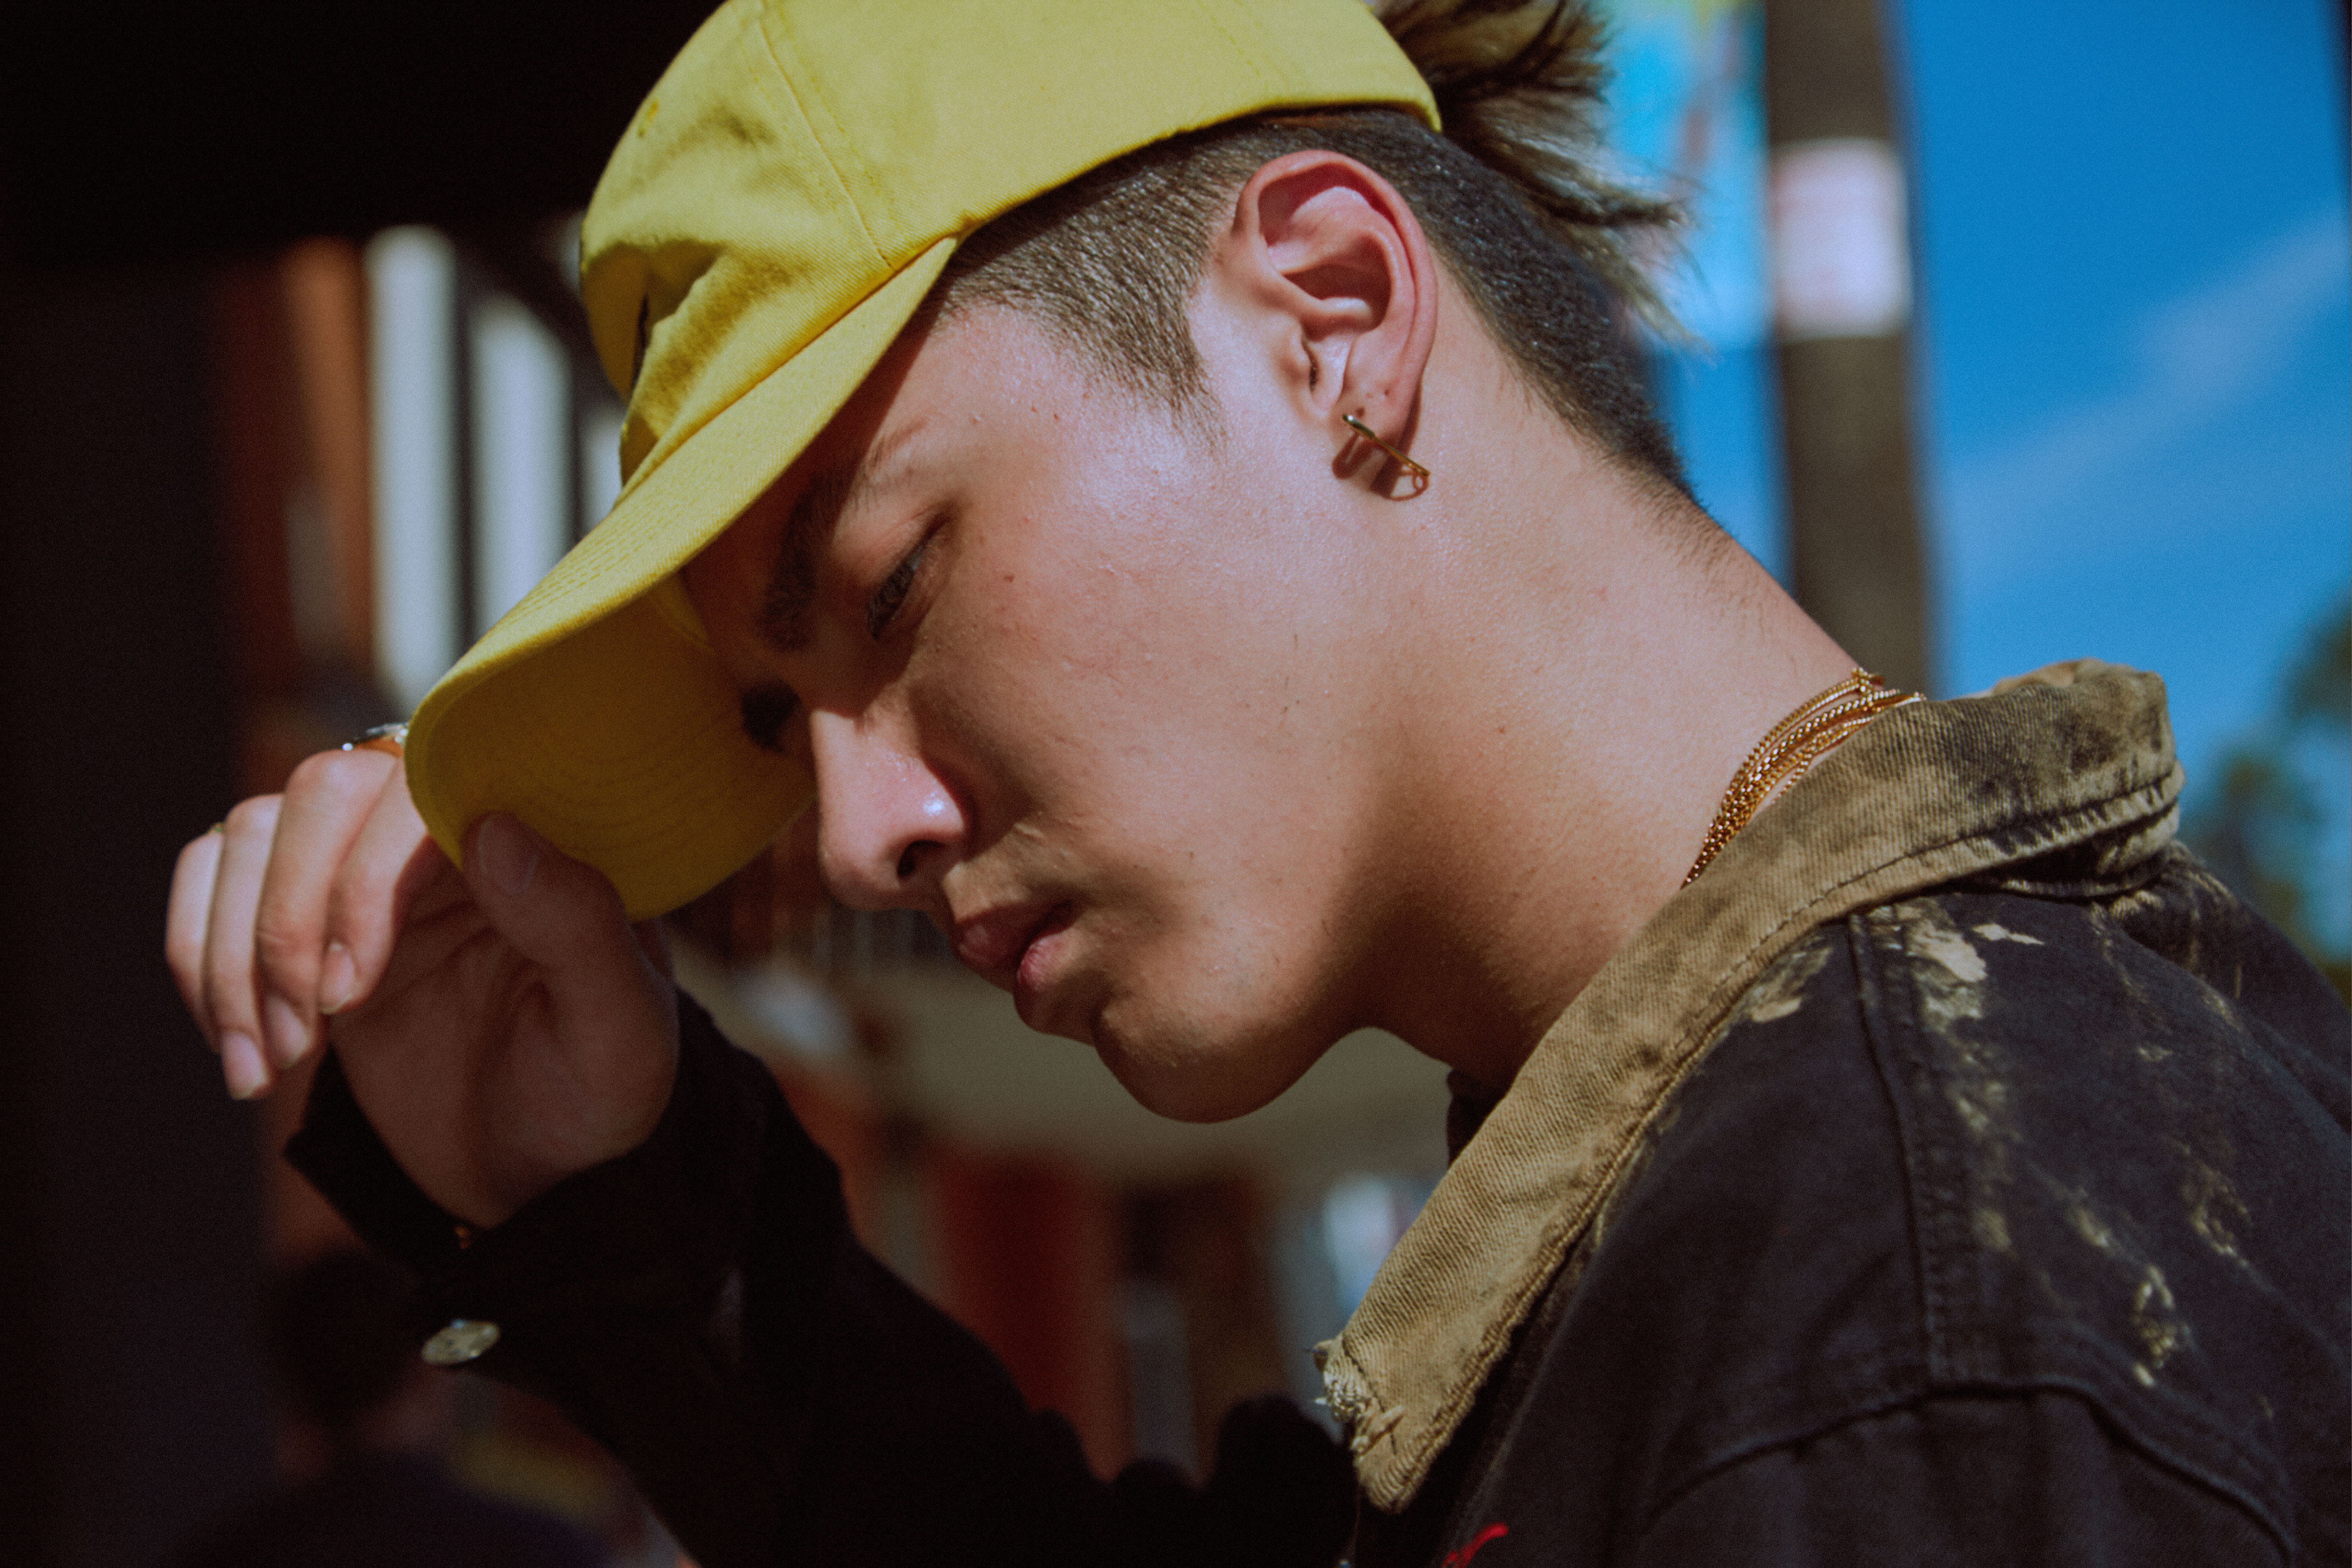 Kris Wu Talks The Hip Hop Culture in China, Working With Travis